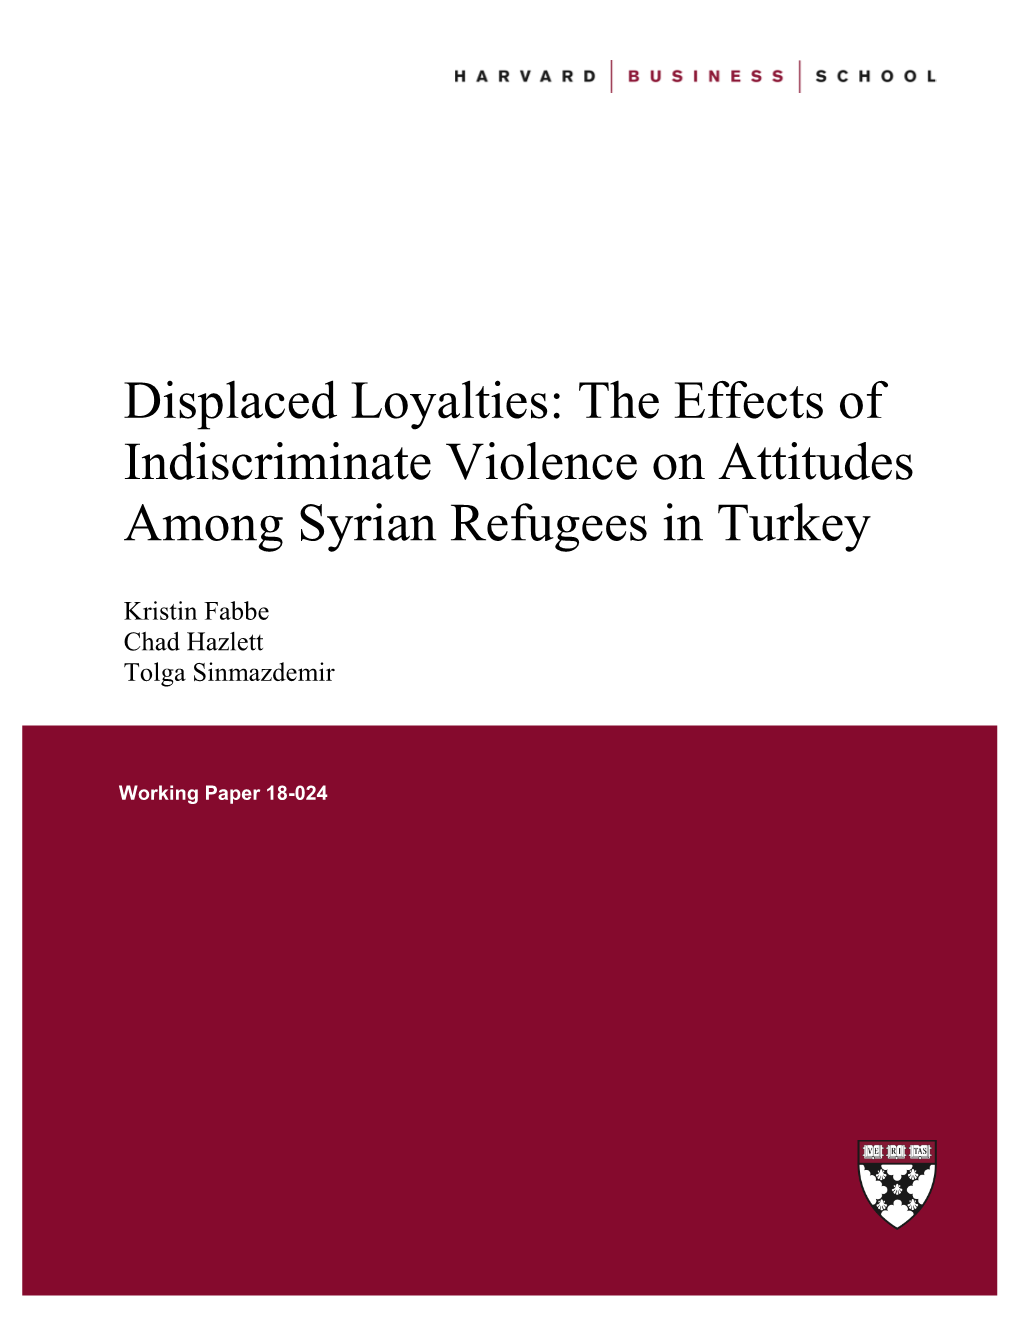 Displaced Loyalties: the Effects of Indiscriminate Violence on Attitudes Among Syrian Refugees in Turkey